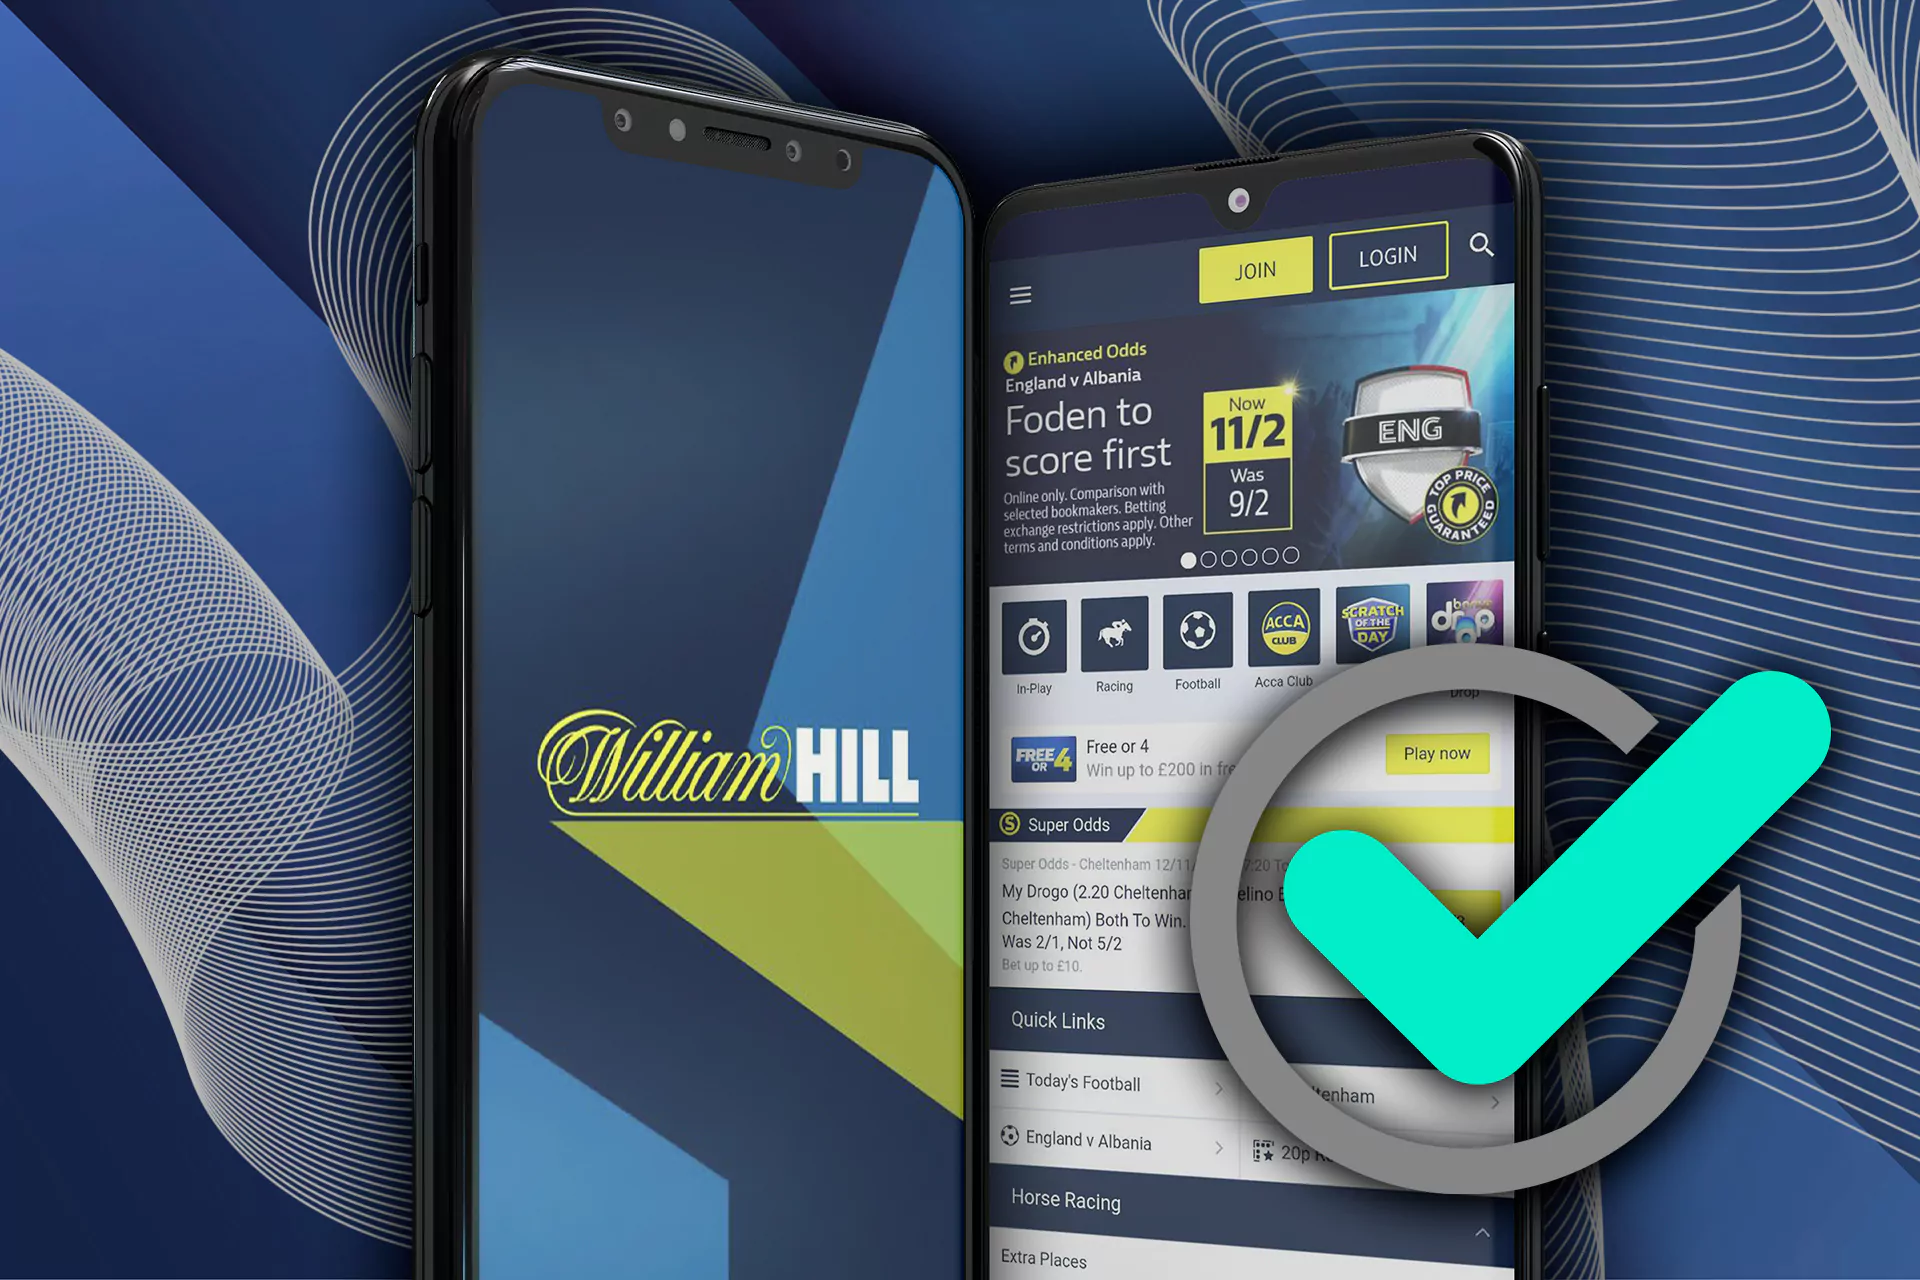 William Hill has a great app for both cricket betting and casino gaming.